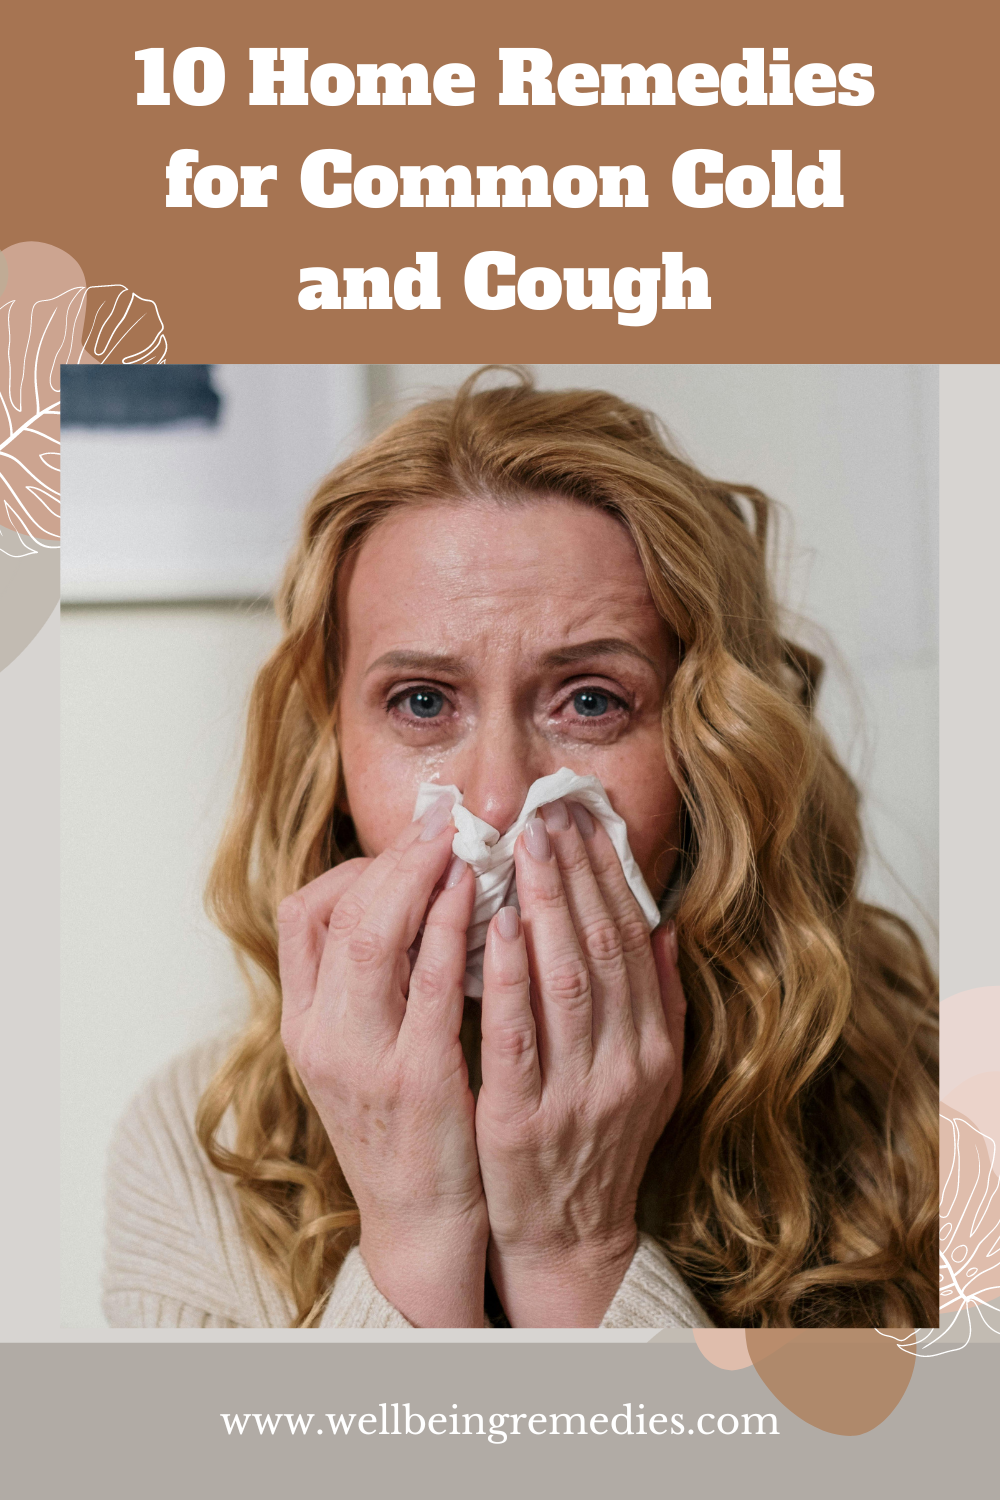 10 Home Remedies for Common Cold and Cough